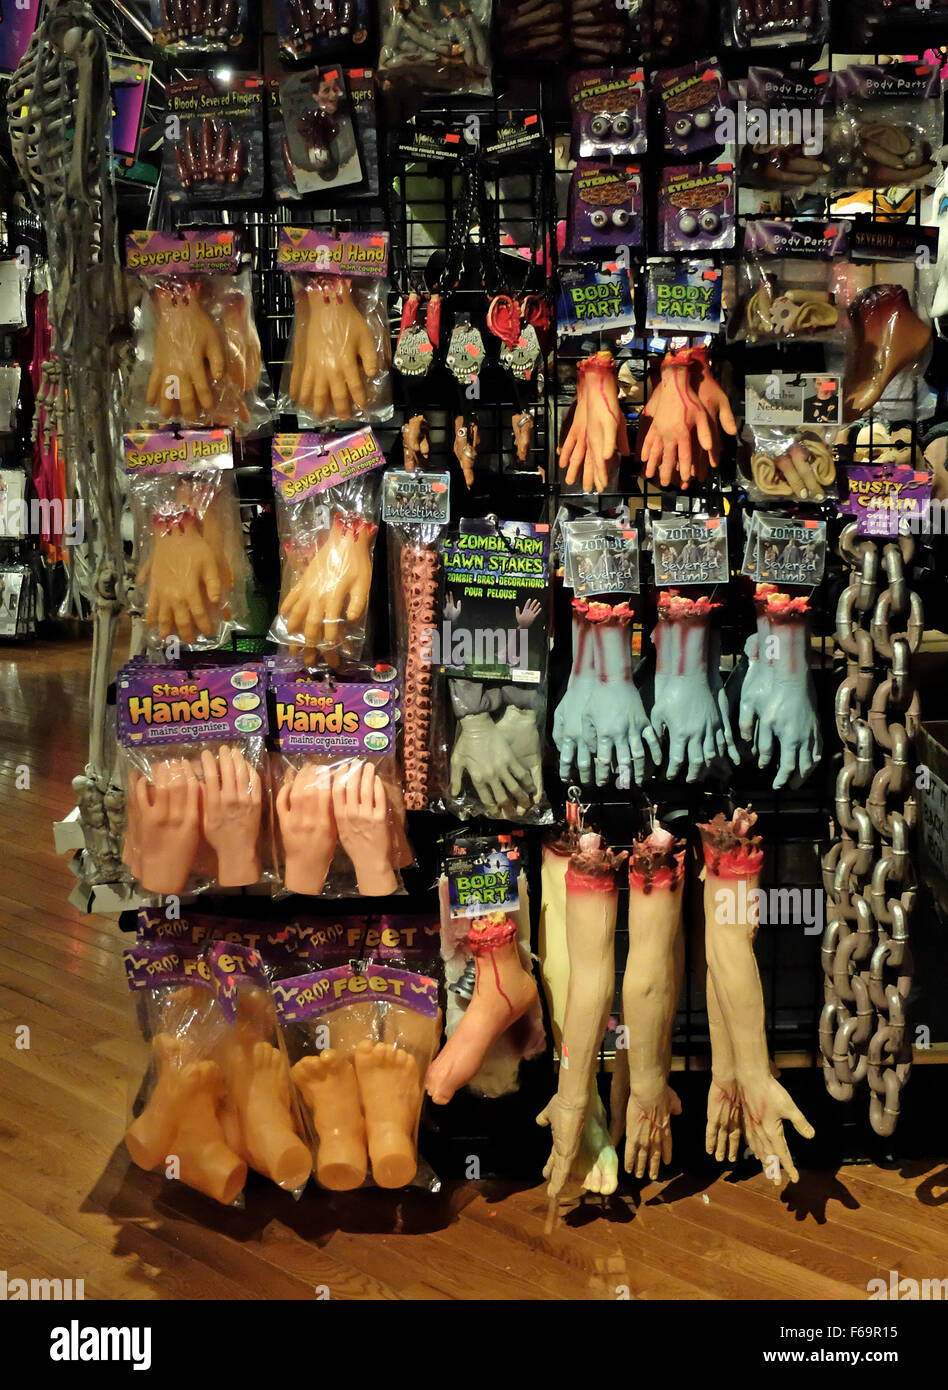 Body part costumes for sale at a large costume store in Greenwich Village, NYC called the Halloween Adventure. Stock Photo